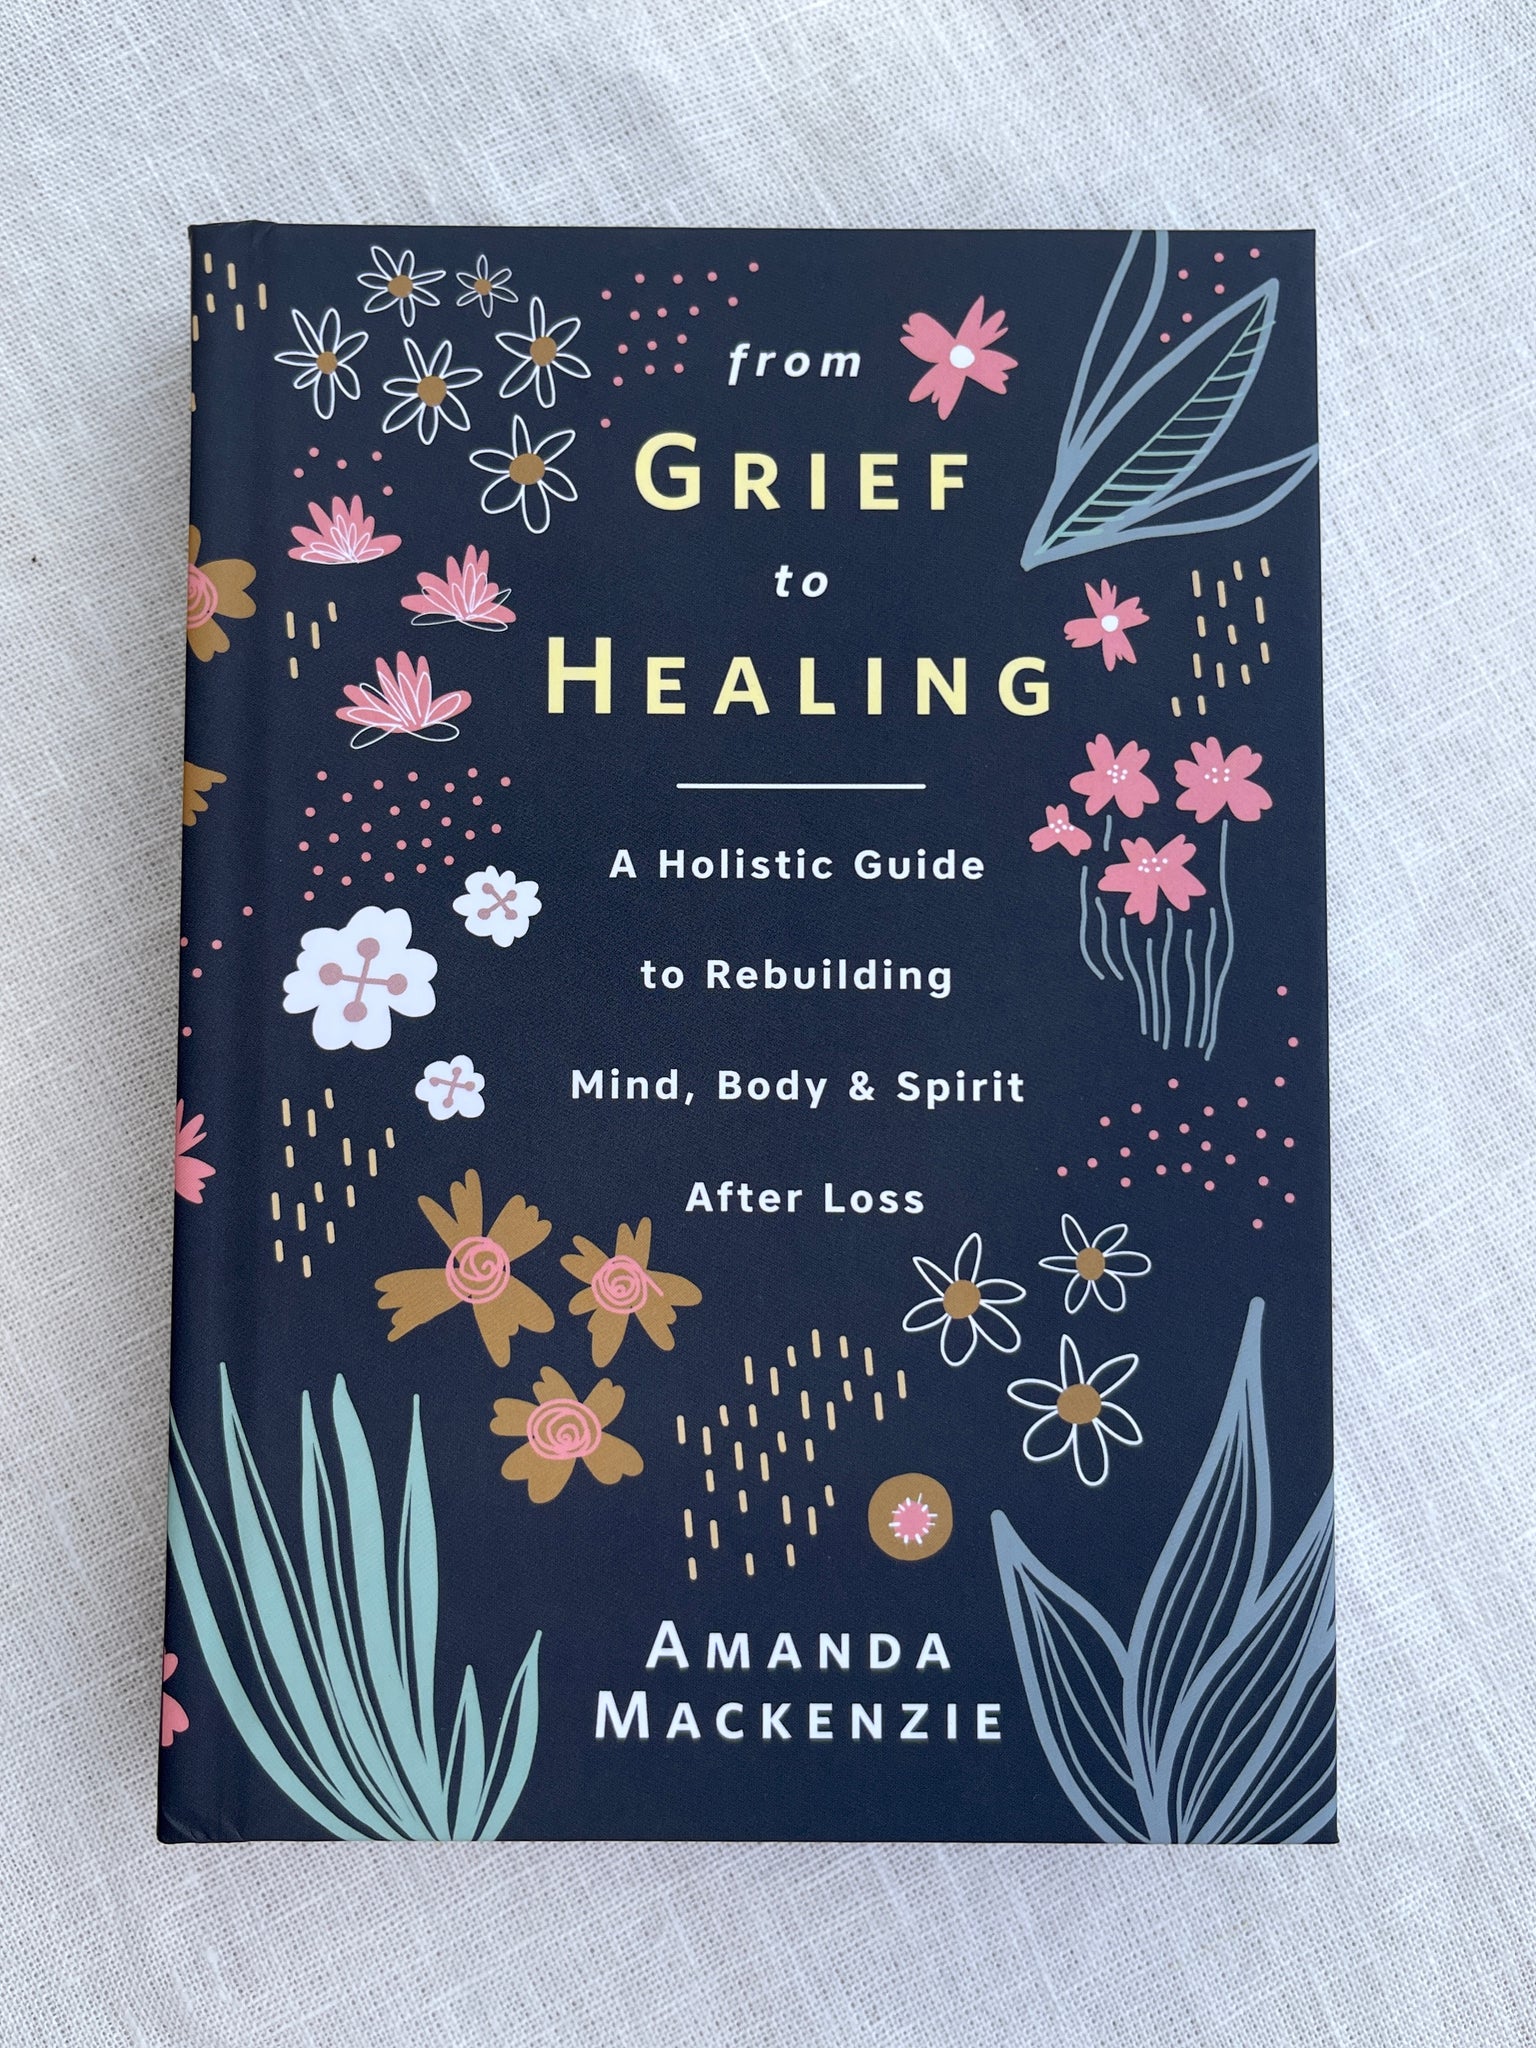 From Grief to Healing book a holistic guide to rebuilding mind, body, and spirit after loss by amanda mackenzie